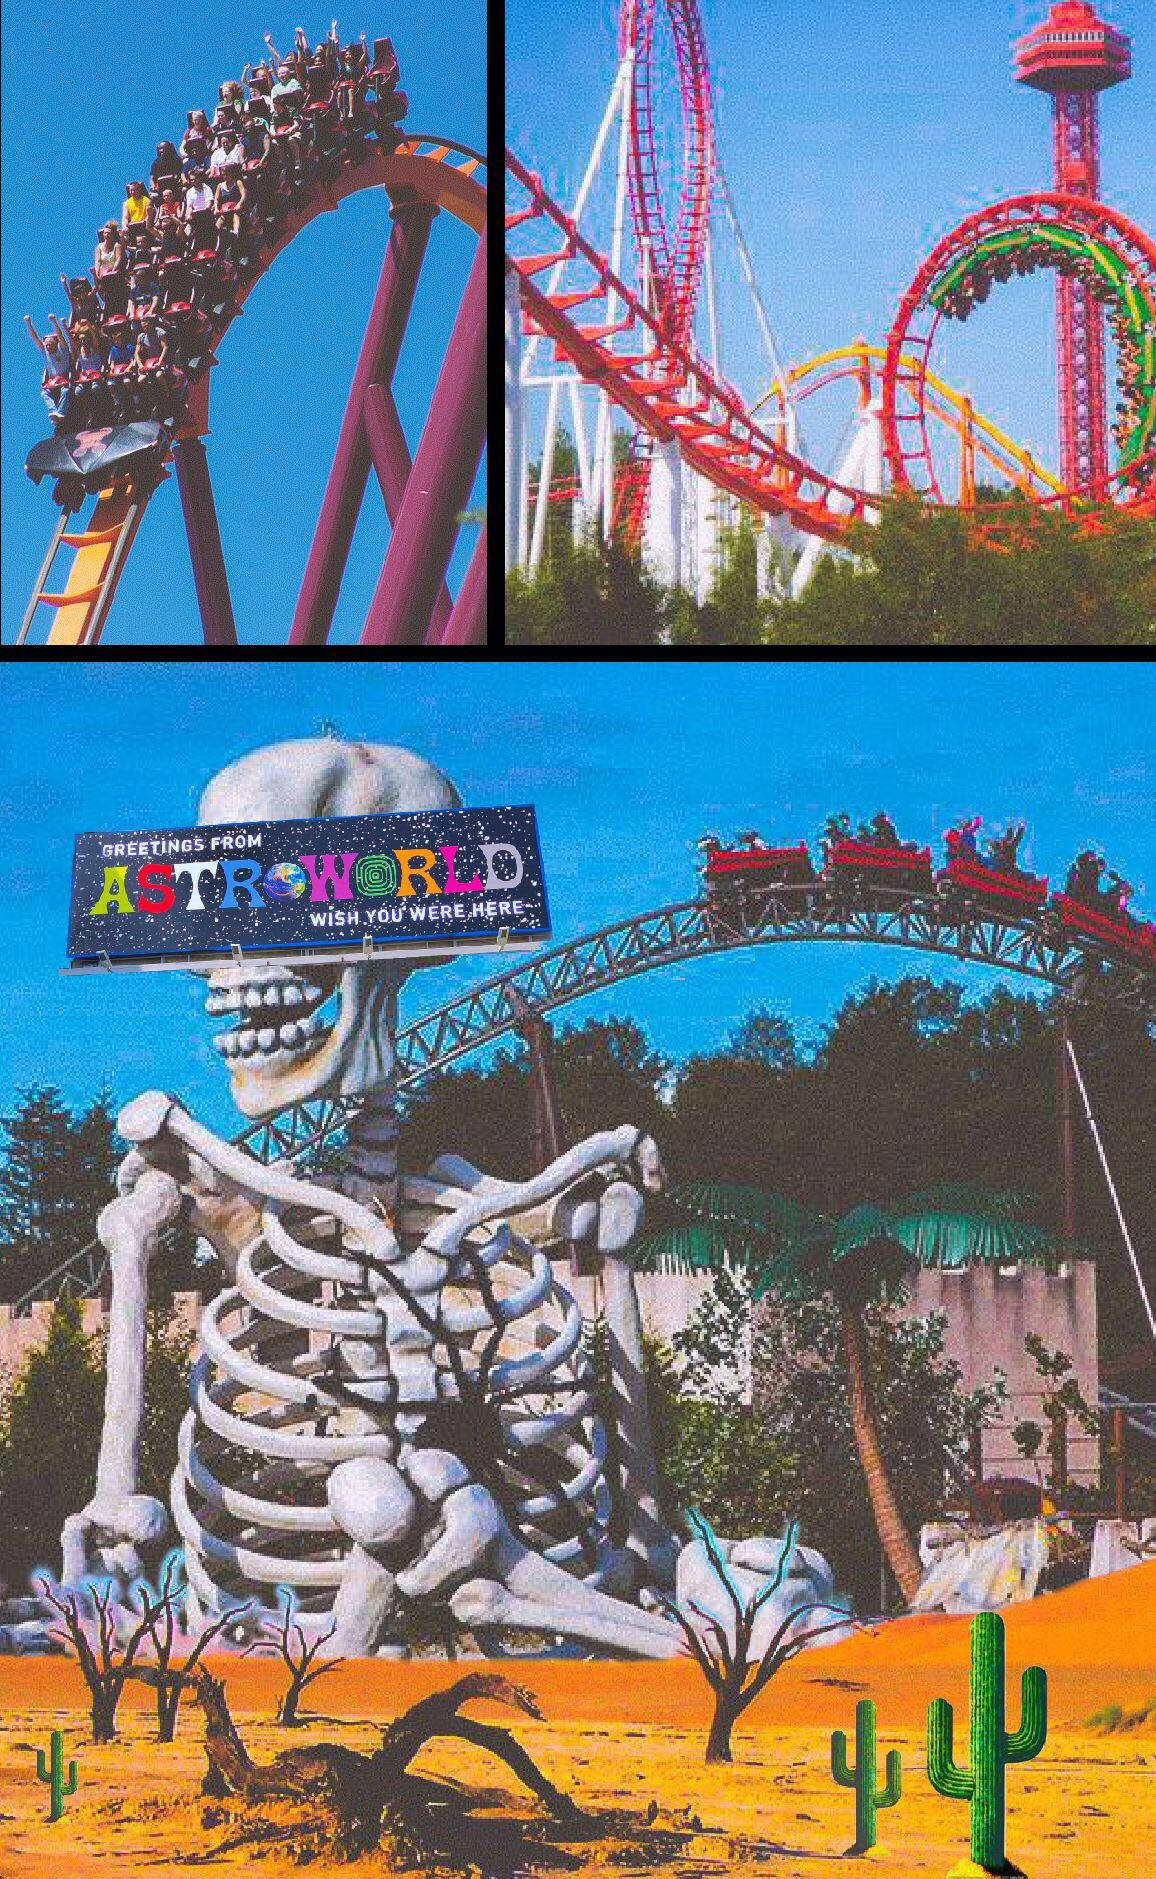 Get Ready To Blast Off To The Fun Of Astroworld On Your Iphone! Wallpaper